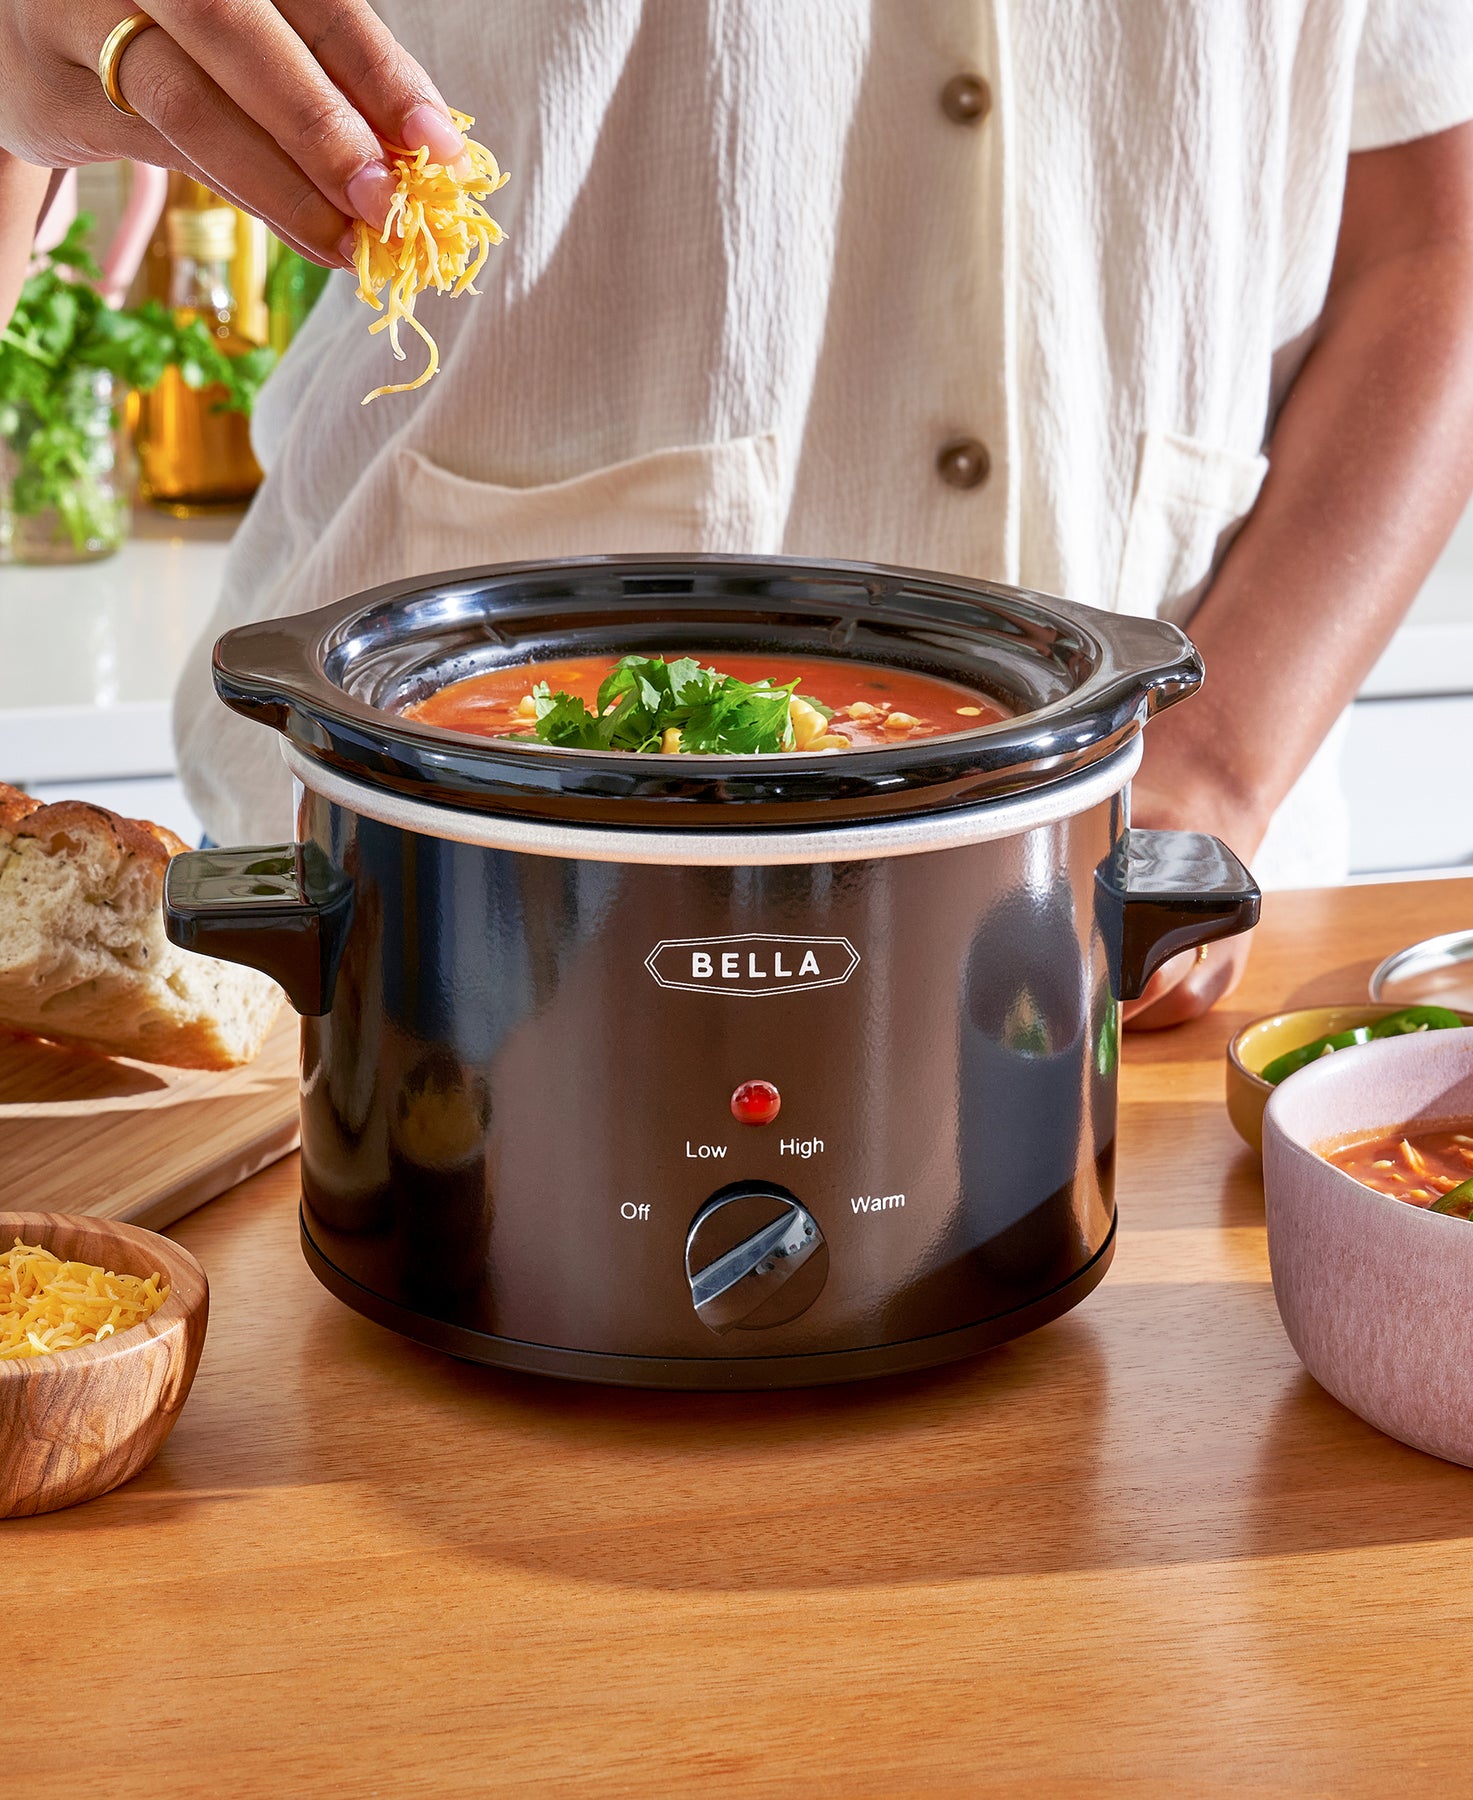 Crock-Pot Slow Cookers Are on Sale and Make Great Gifts